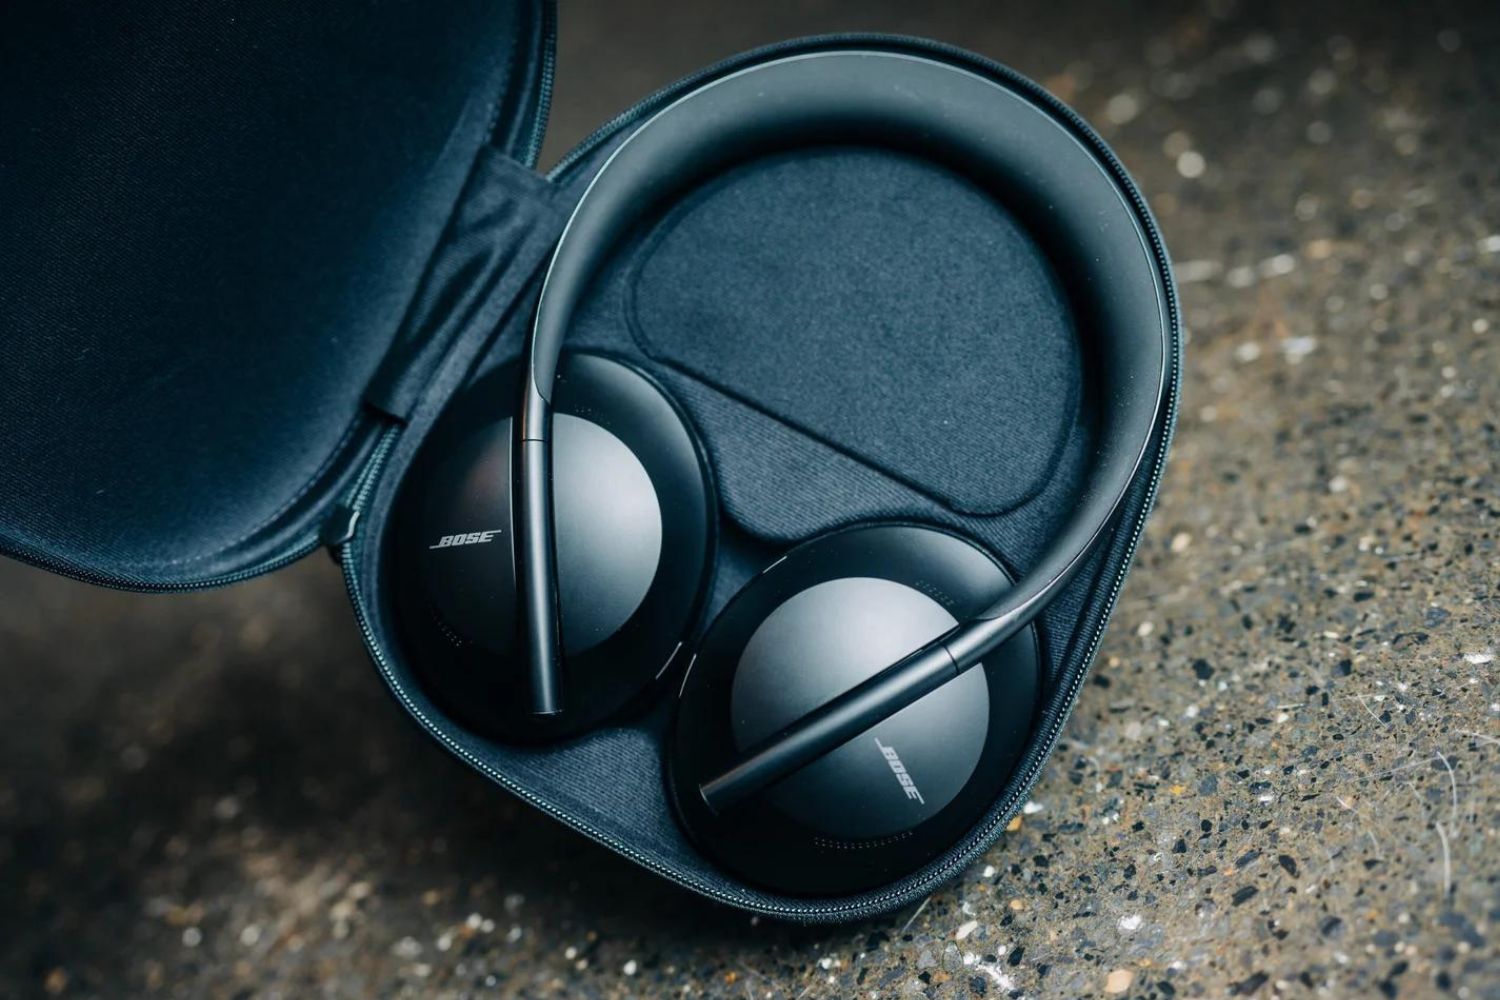 How To Identify Bose Noise Cancelling Headphones